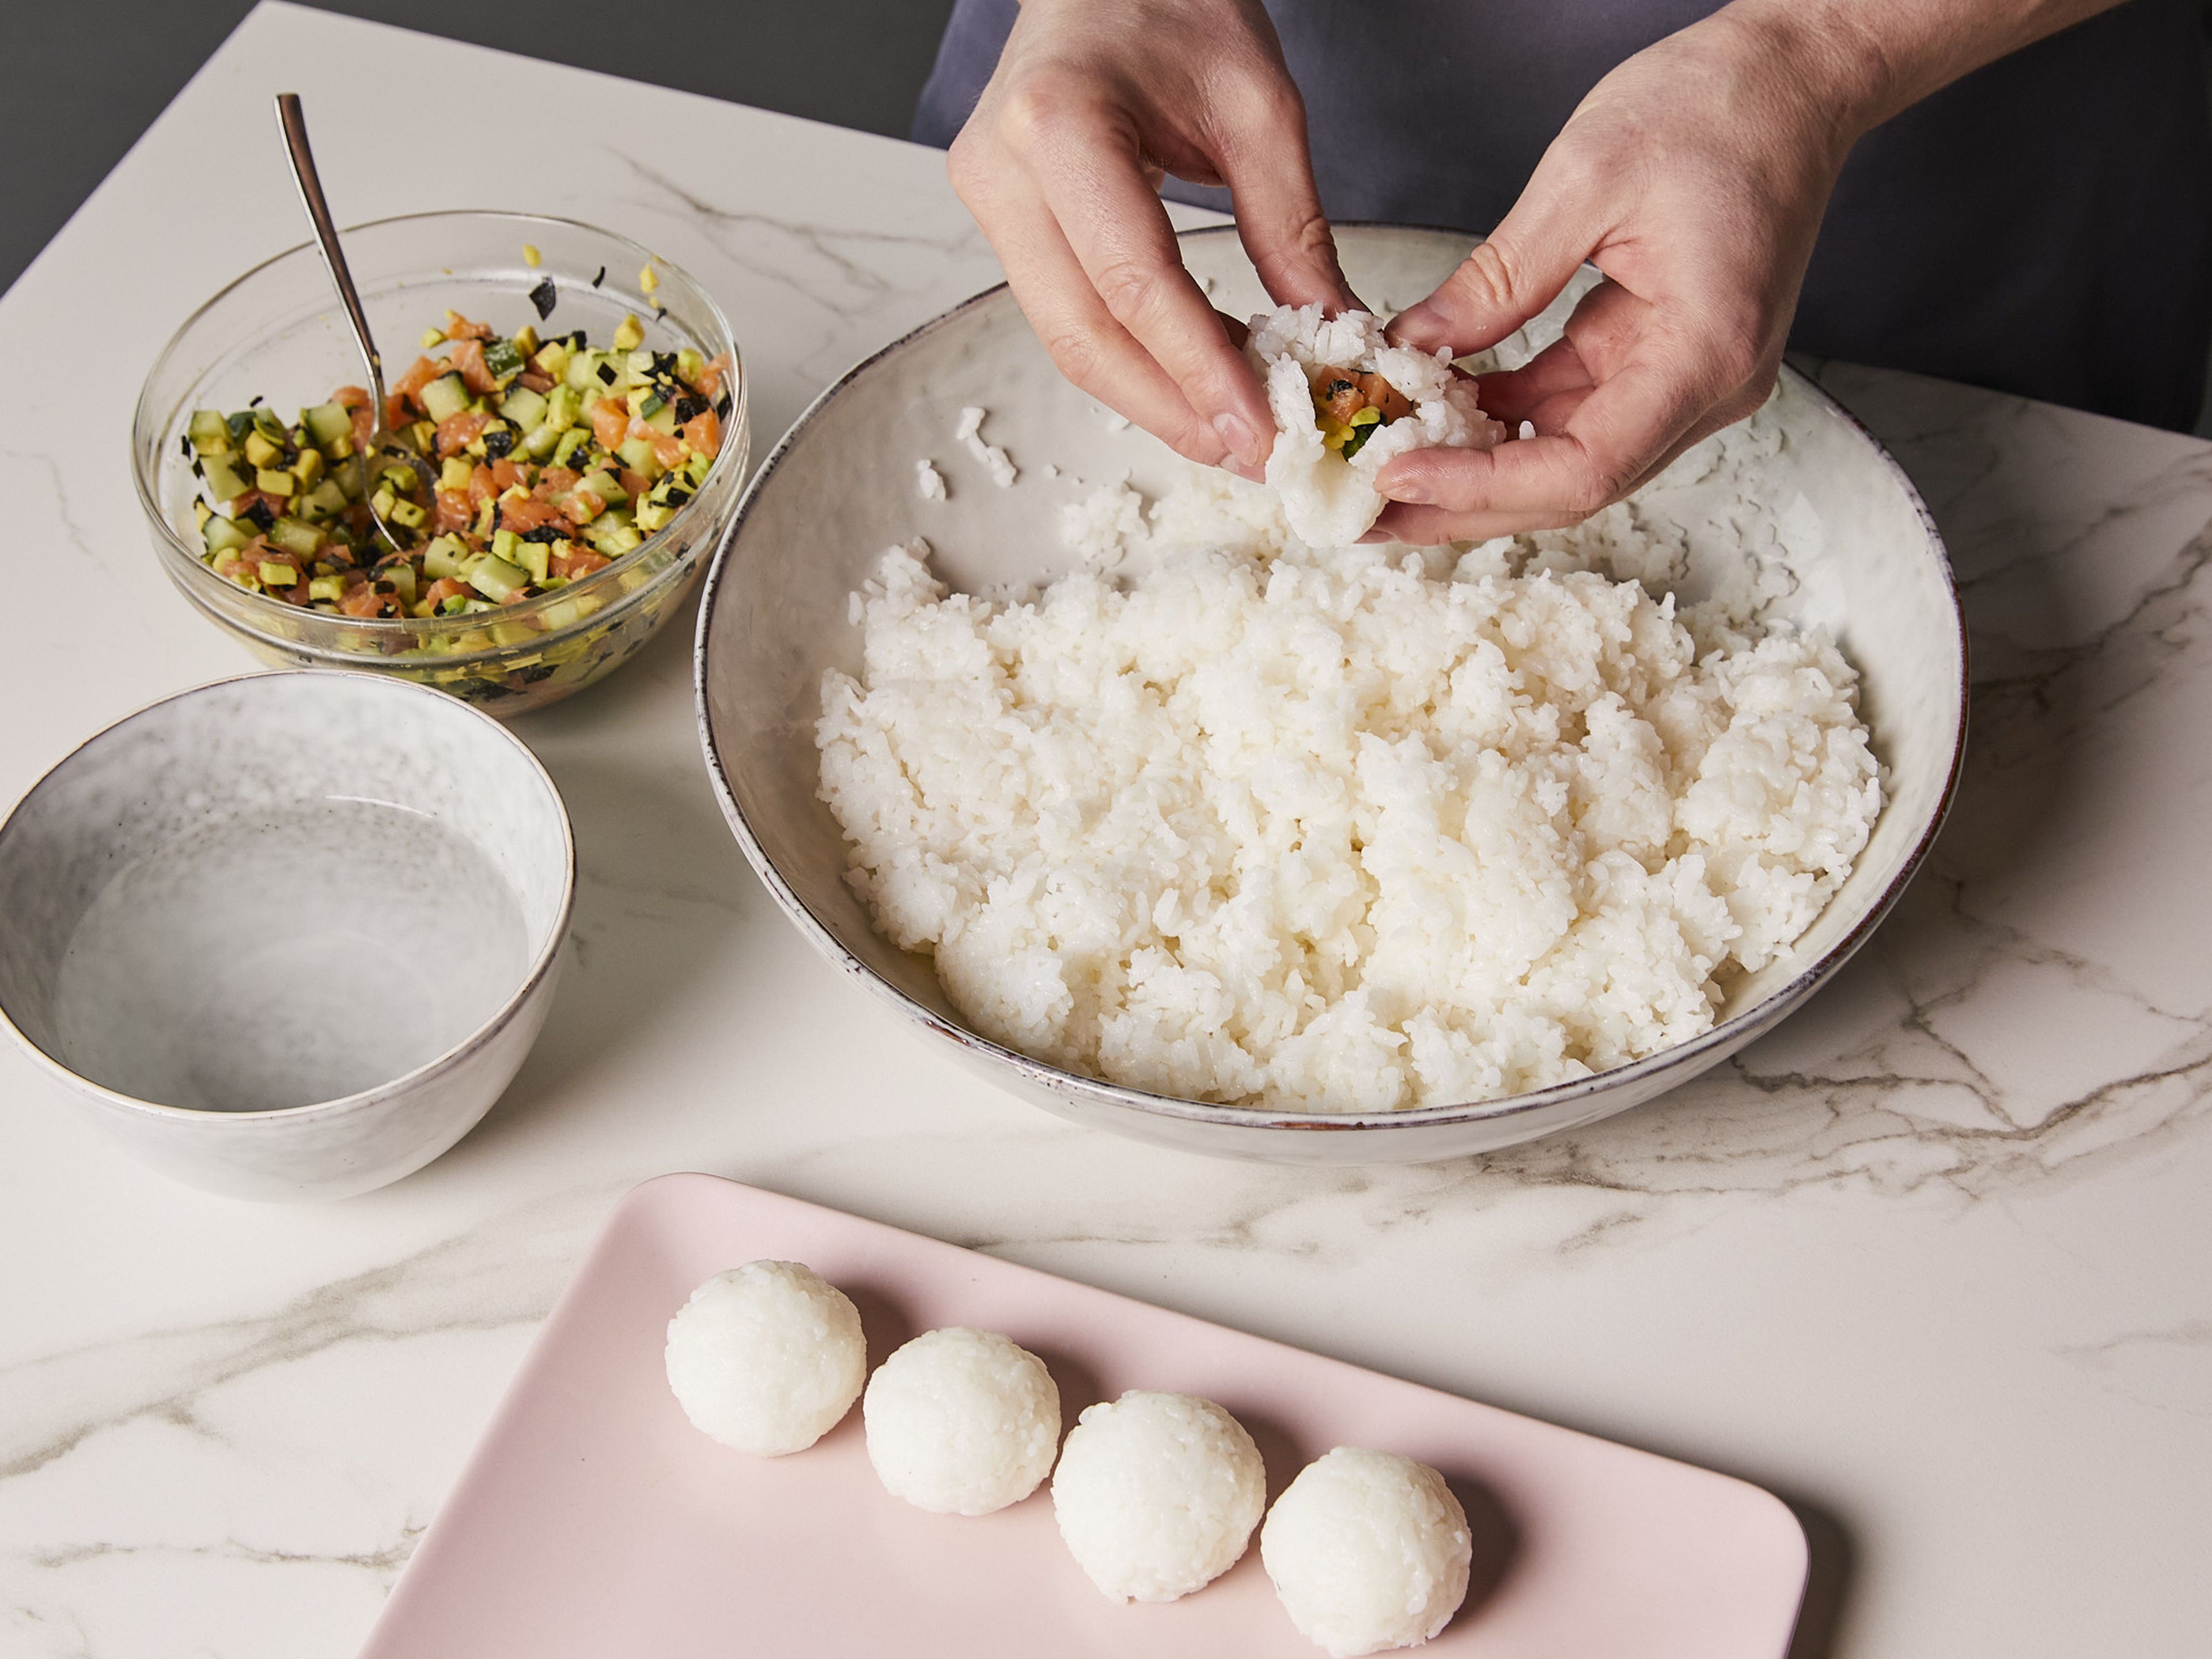 With wet hands, take a small handful, approx. the size of an egg, of the cooled rice and form into a ball, then press into the center with your thumb to create a small crater. Pour in a little of the filling, approx. 1 tsp, close the ball tightly and repeat until the rice is used up.